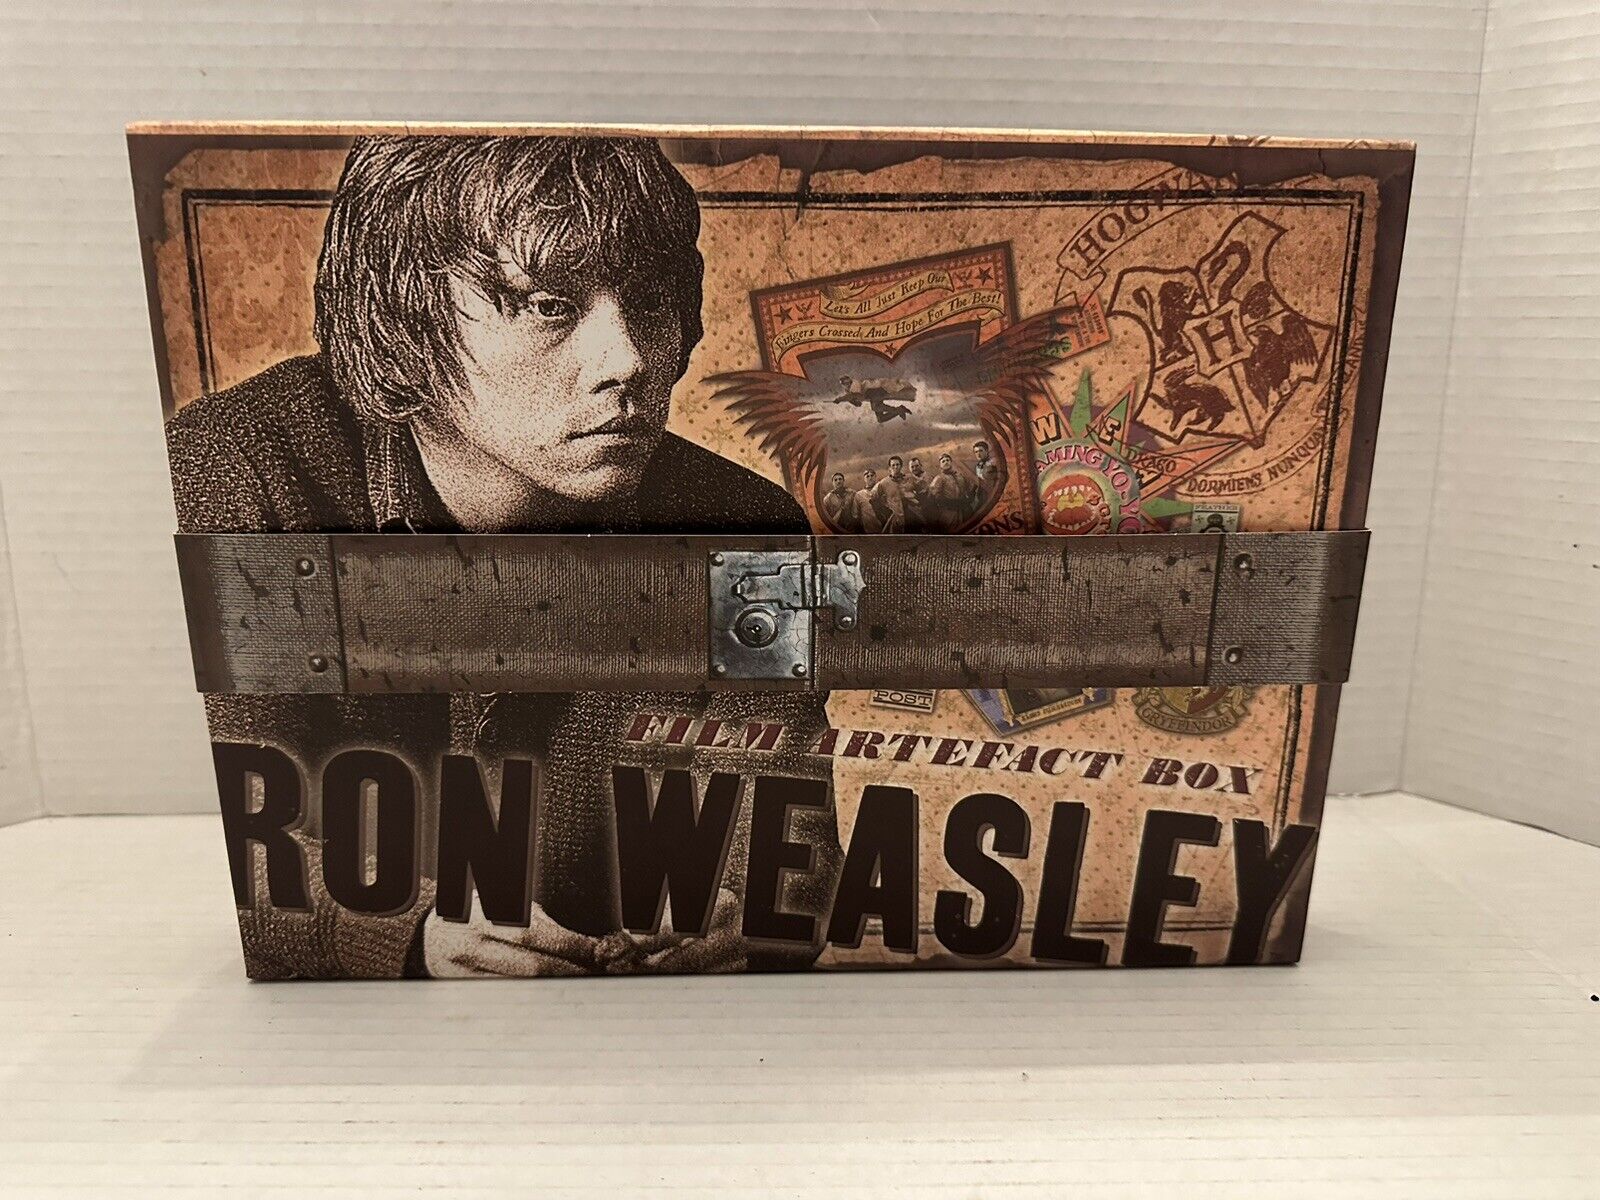 NEW Official Ron Weasley Harry Potter Film Artefact Box Exclusive